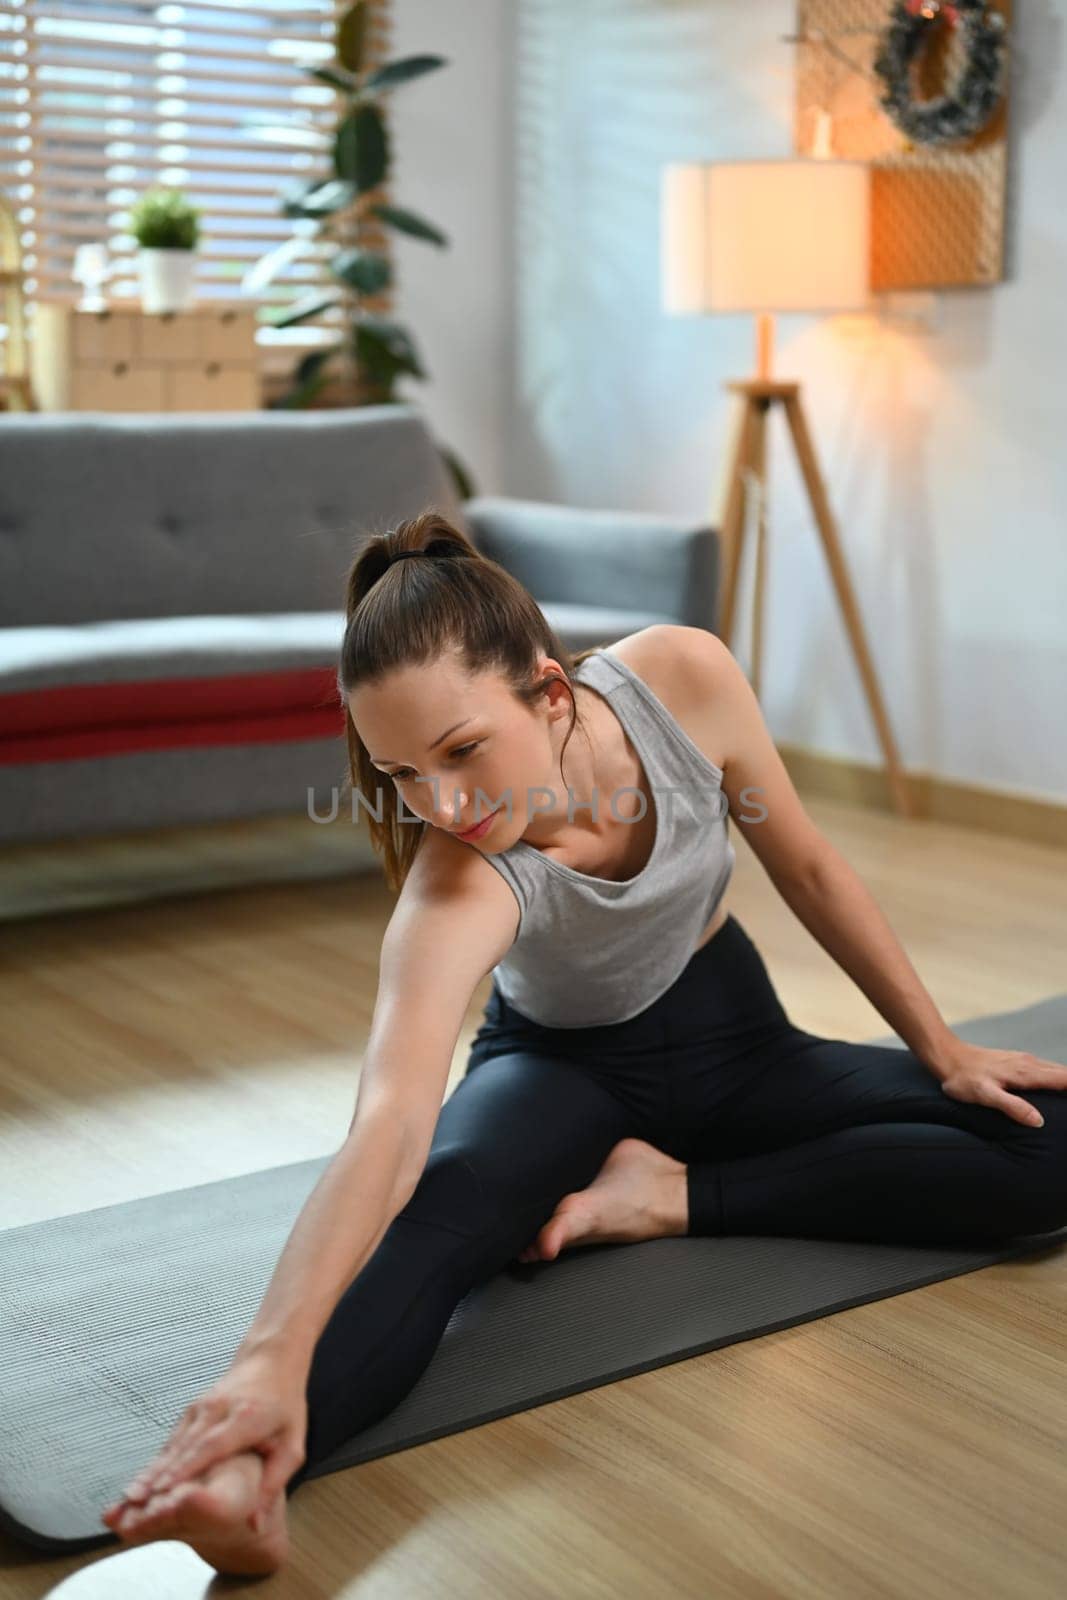 Beautiful woman in sportswear doing stretching on yoga mat at home. Healthy lifestyle concept.